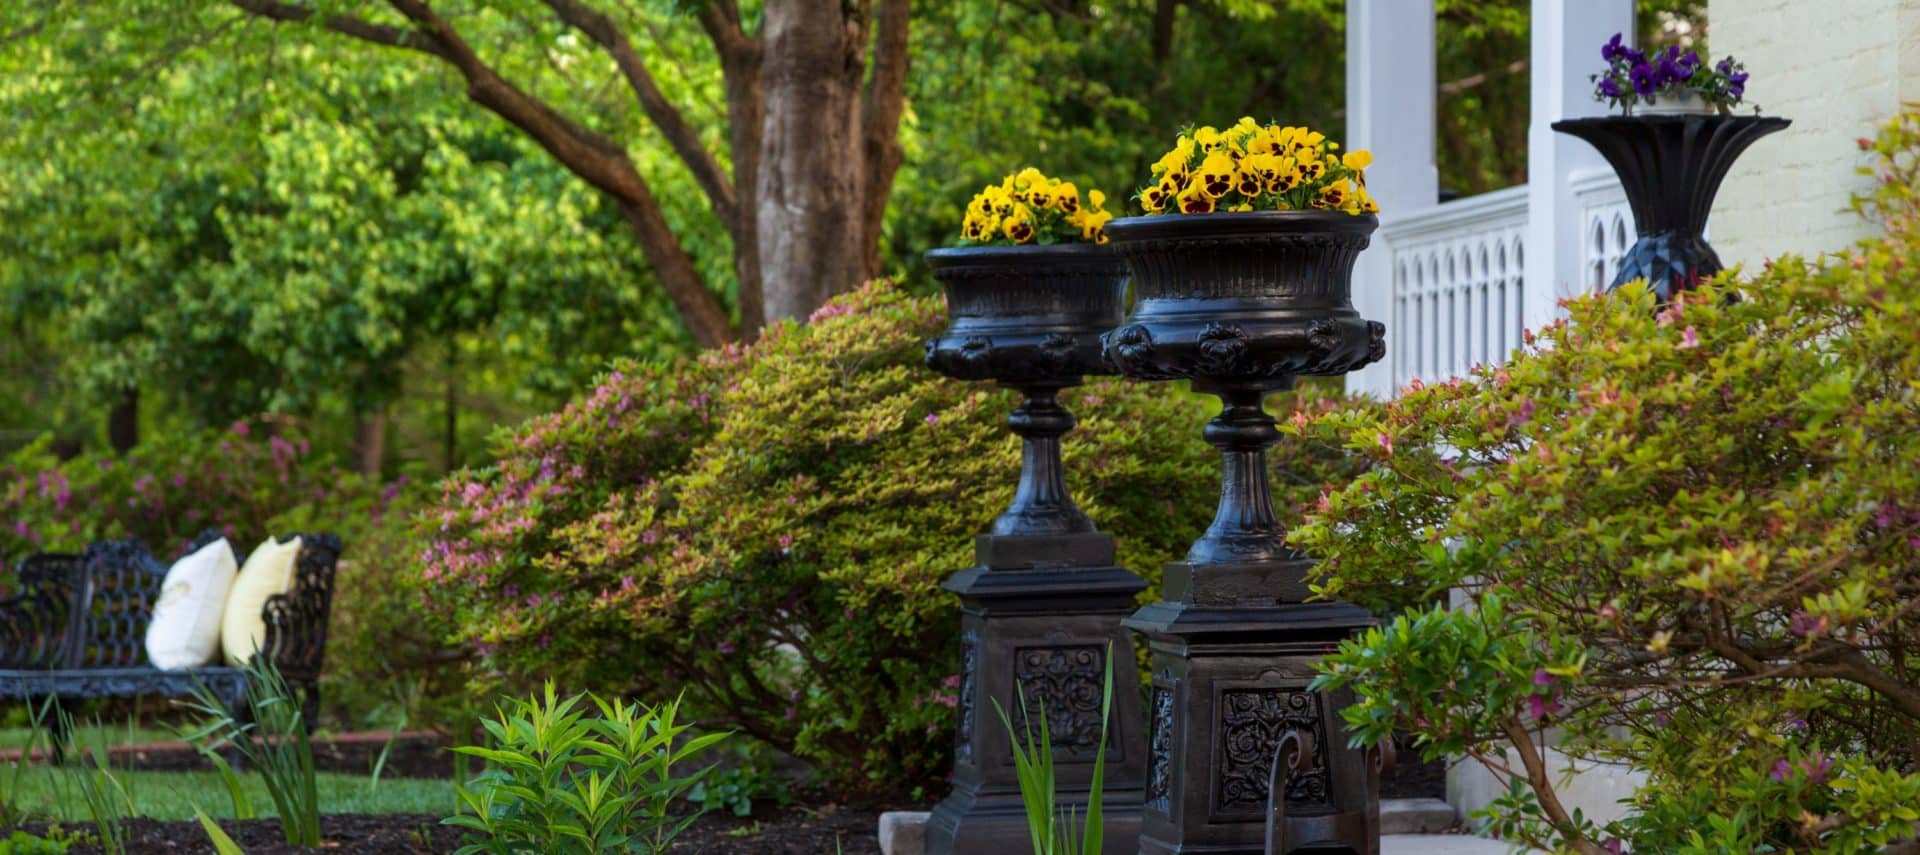 Two black gothic planters with yellow flowers surrounded by lush landscaping.